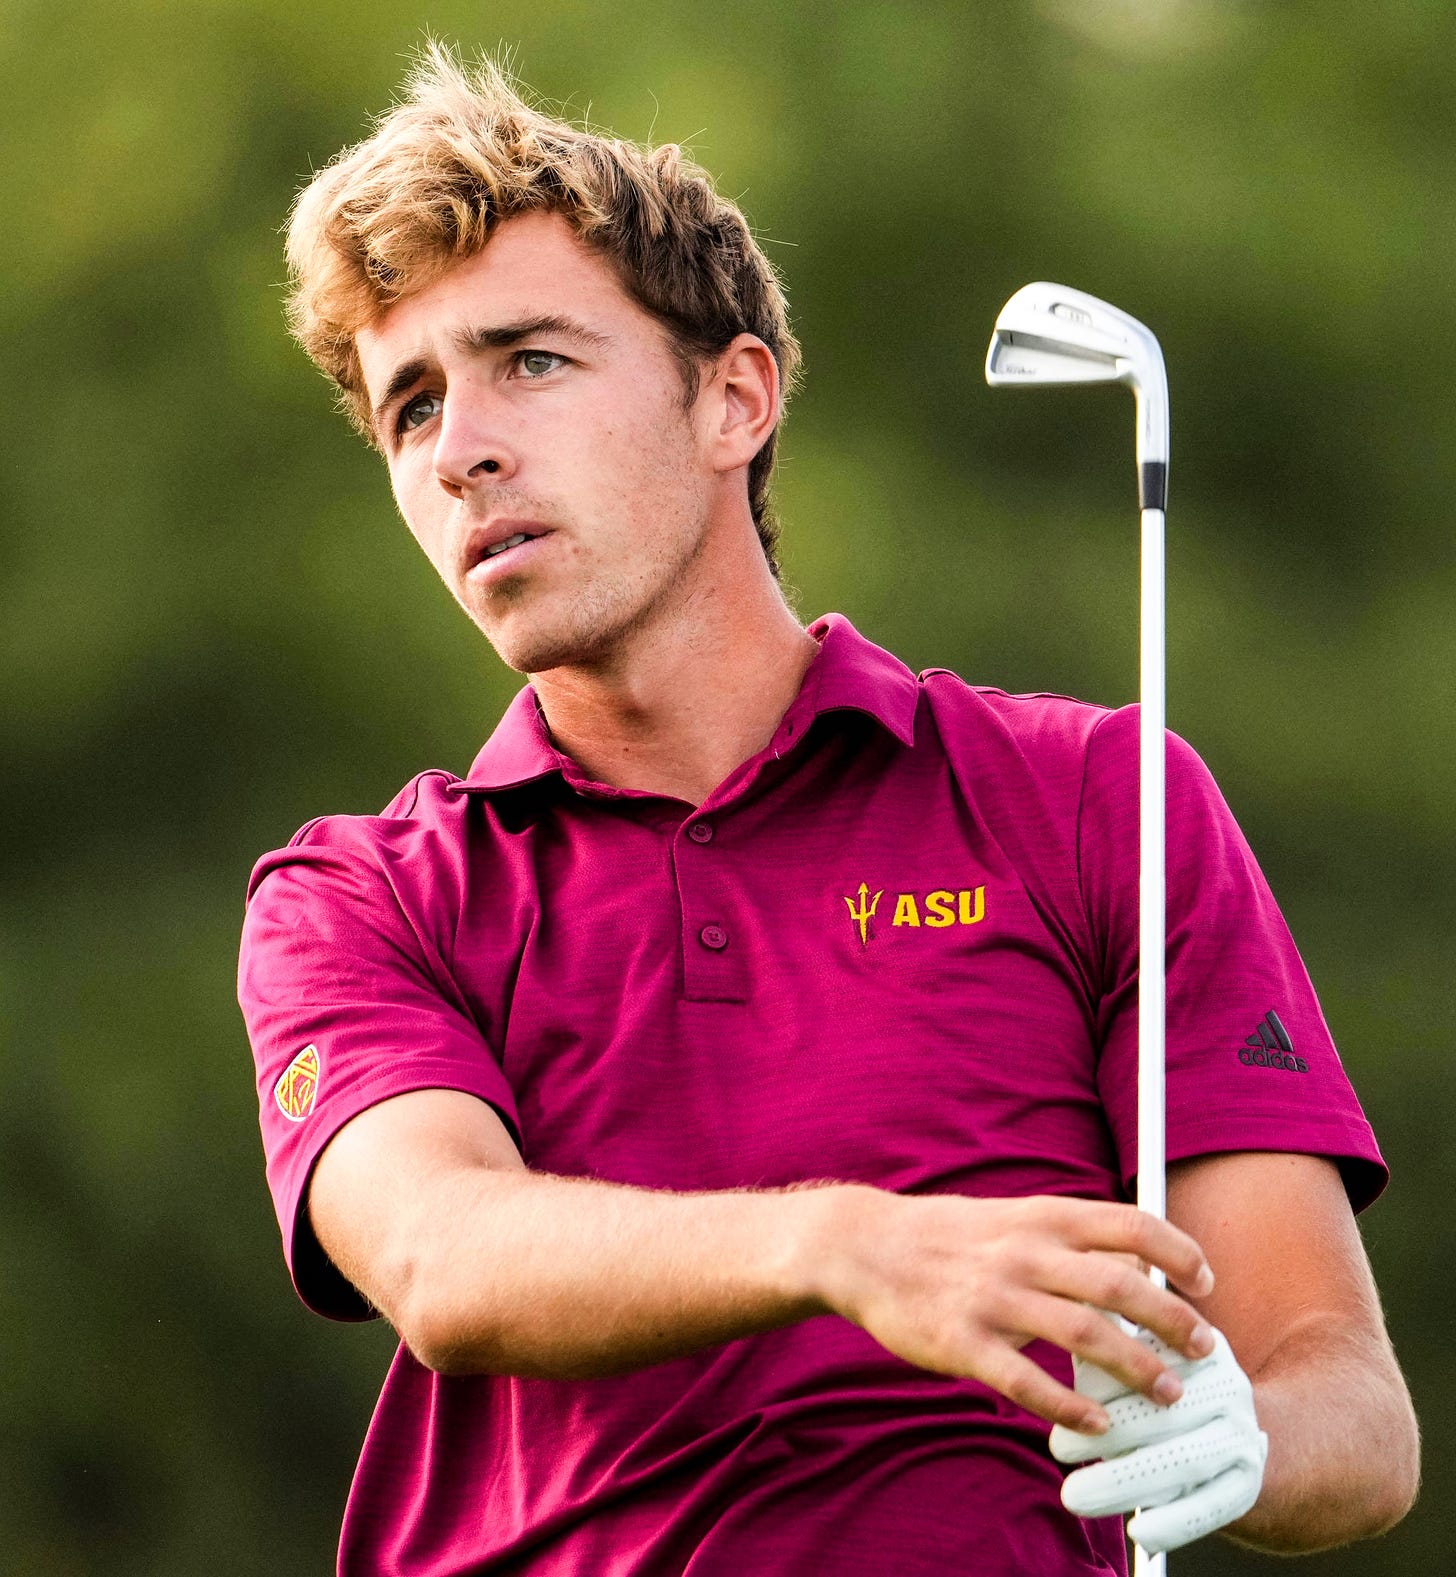 Front Office Sports on Twitter: "LIV Golf has poached one of the top  amateurs in the world. David Puig, current World No. 9, has announced that  he is leaving Arizona State early